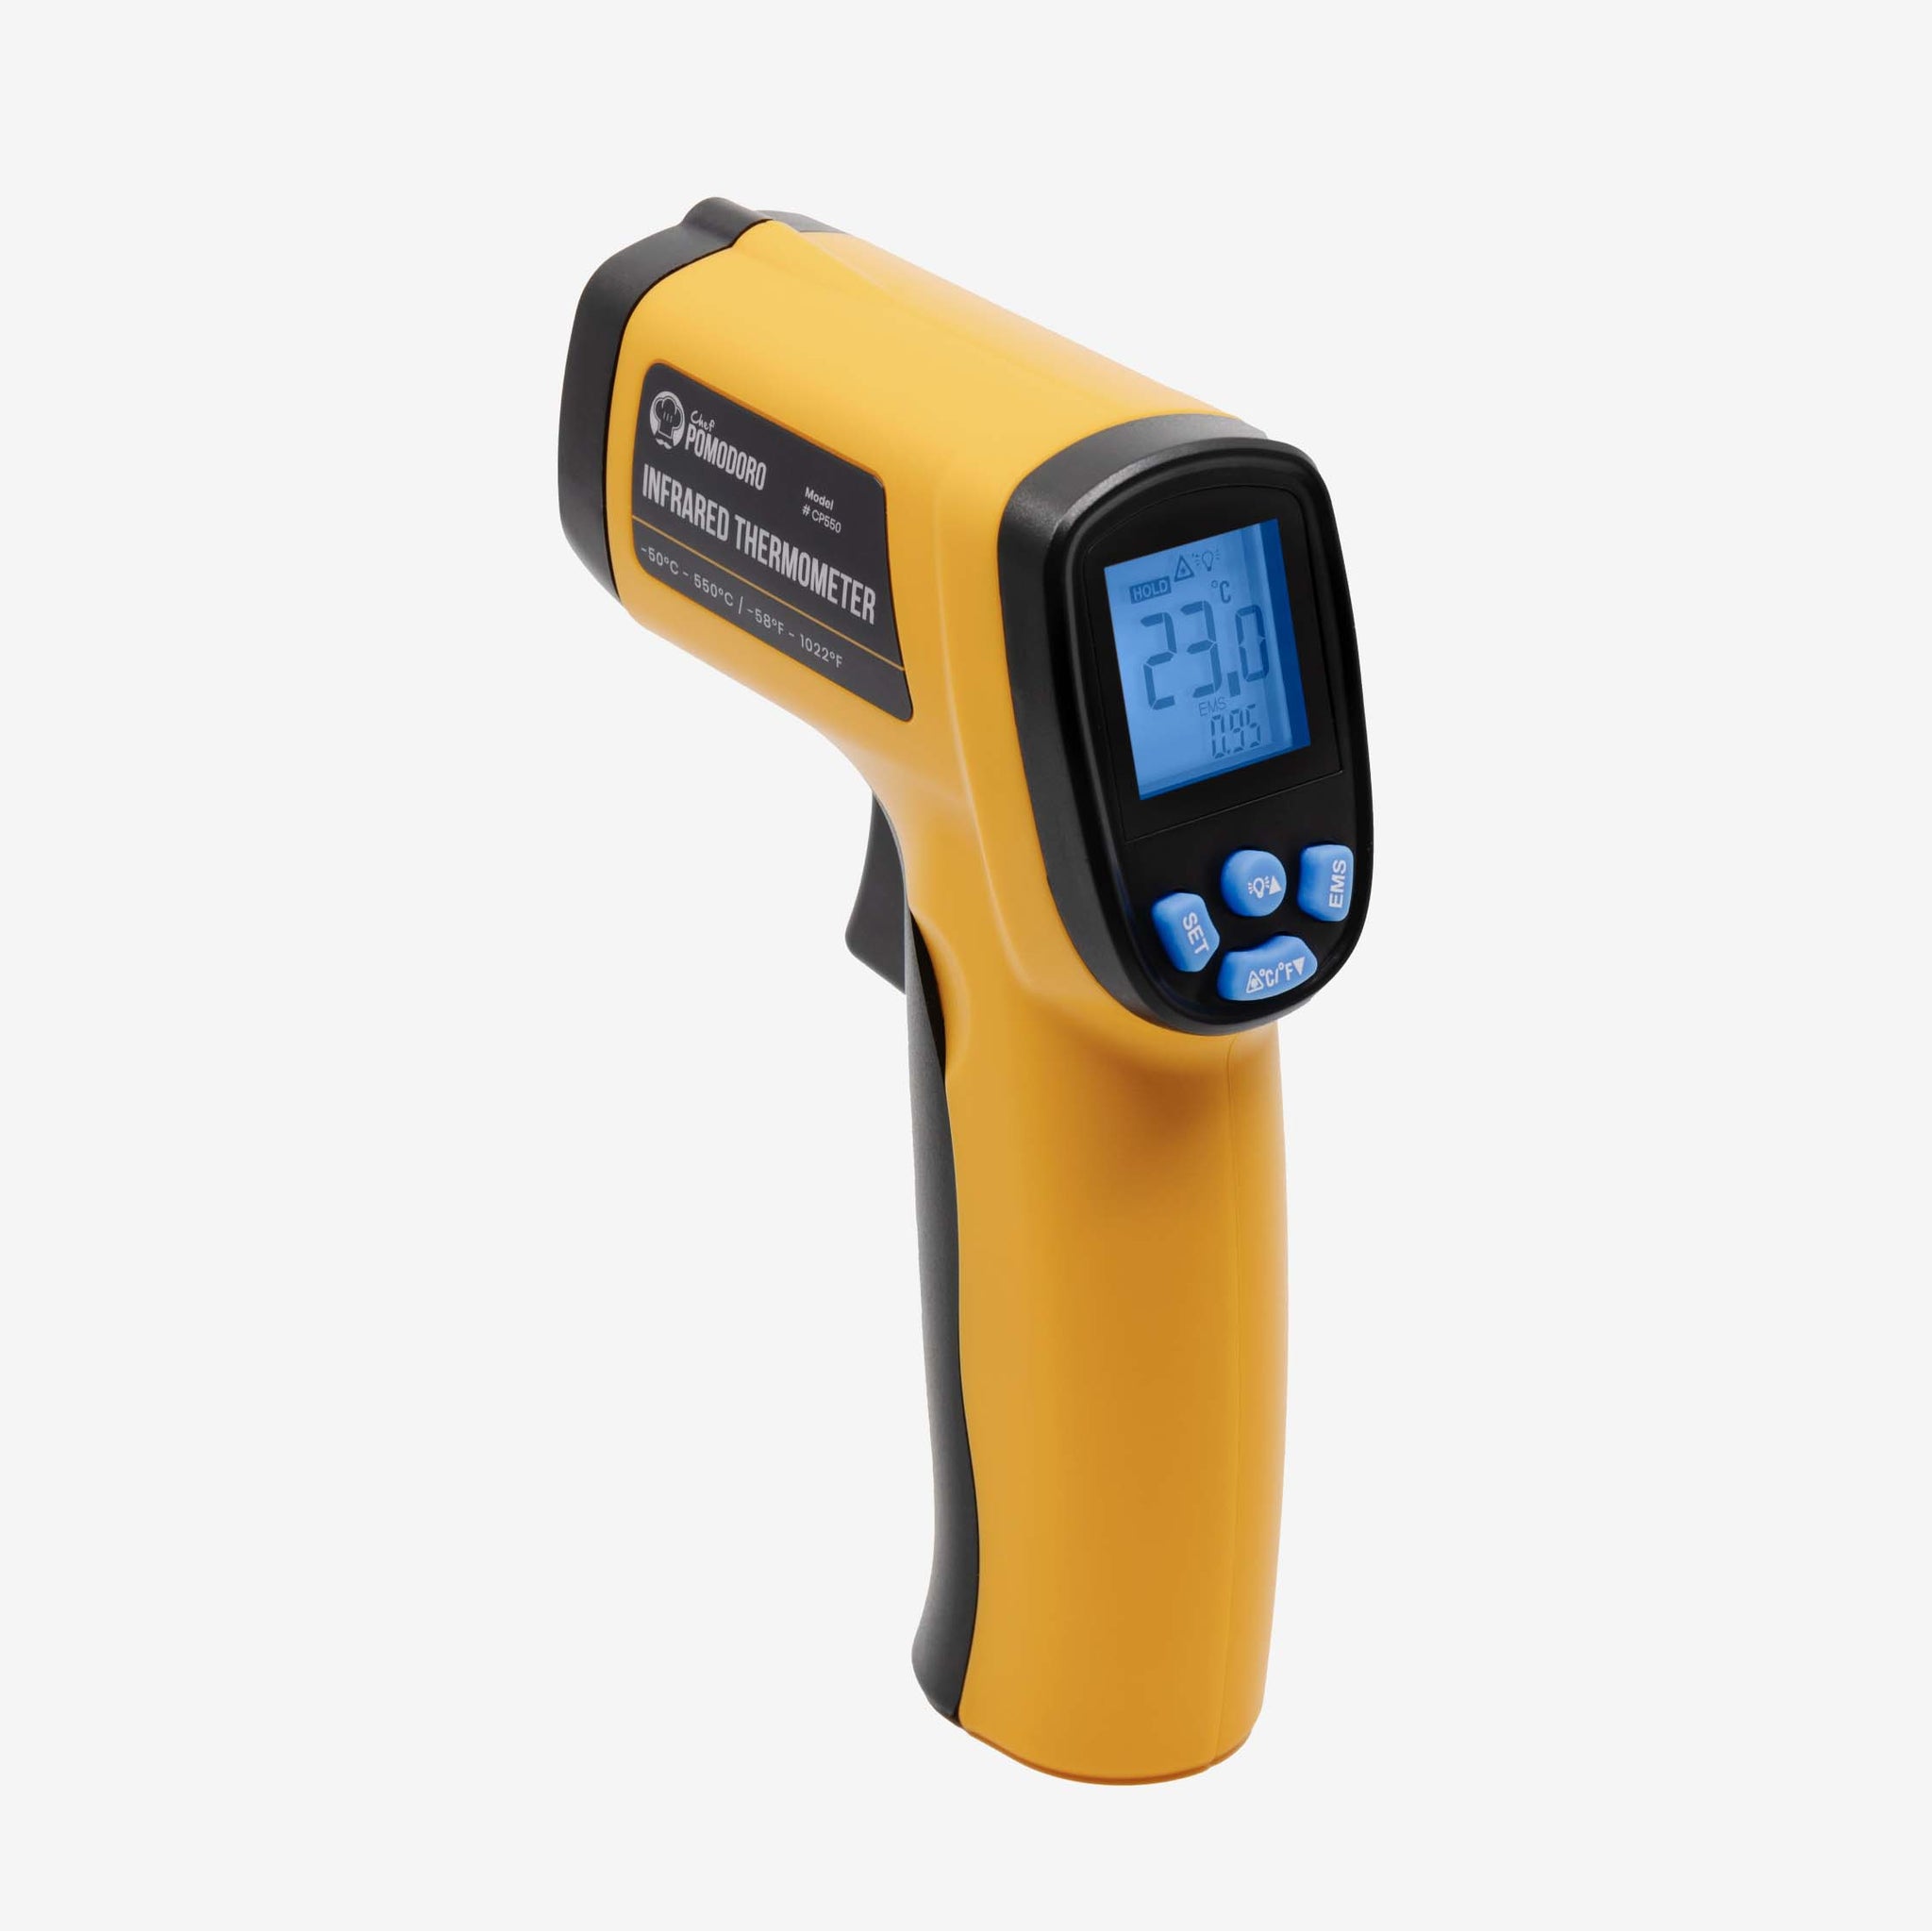 Best Infrared Cooking Thermometer: Features to Consider